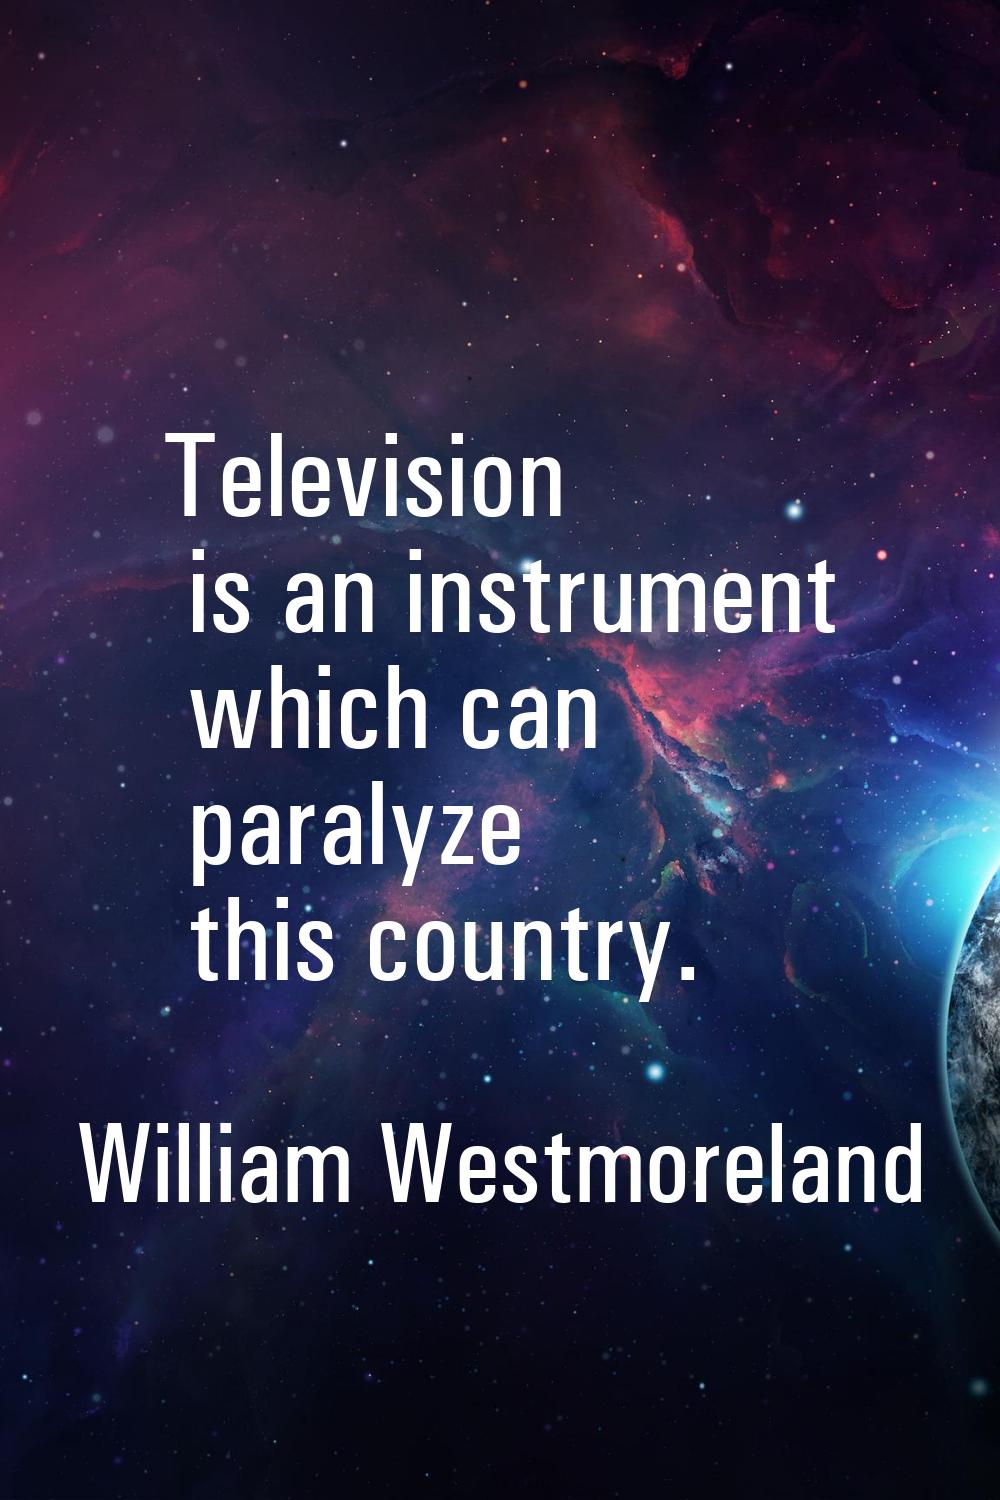 Television is an instrument which can paralyze this country.